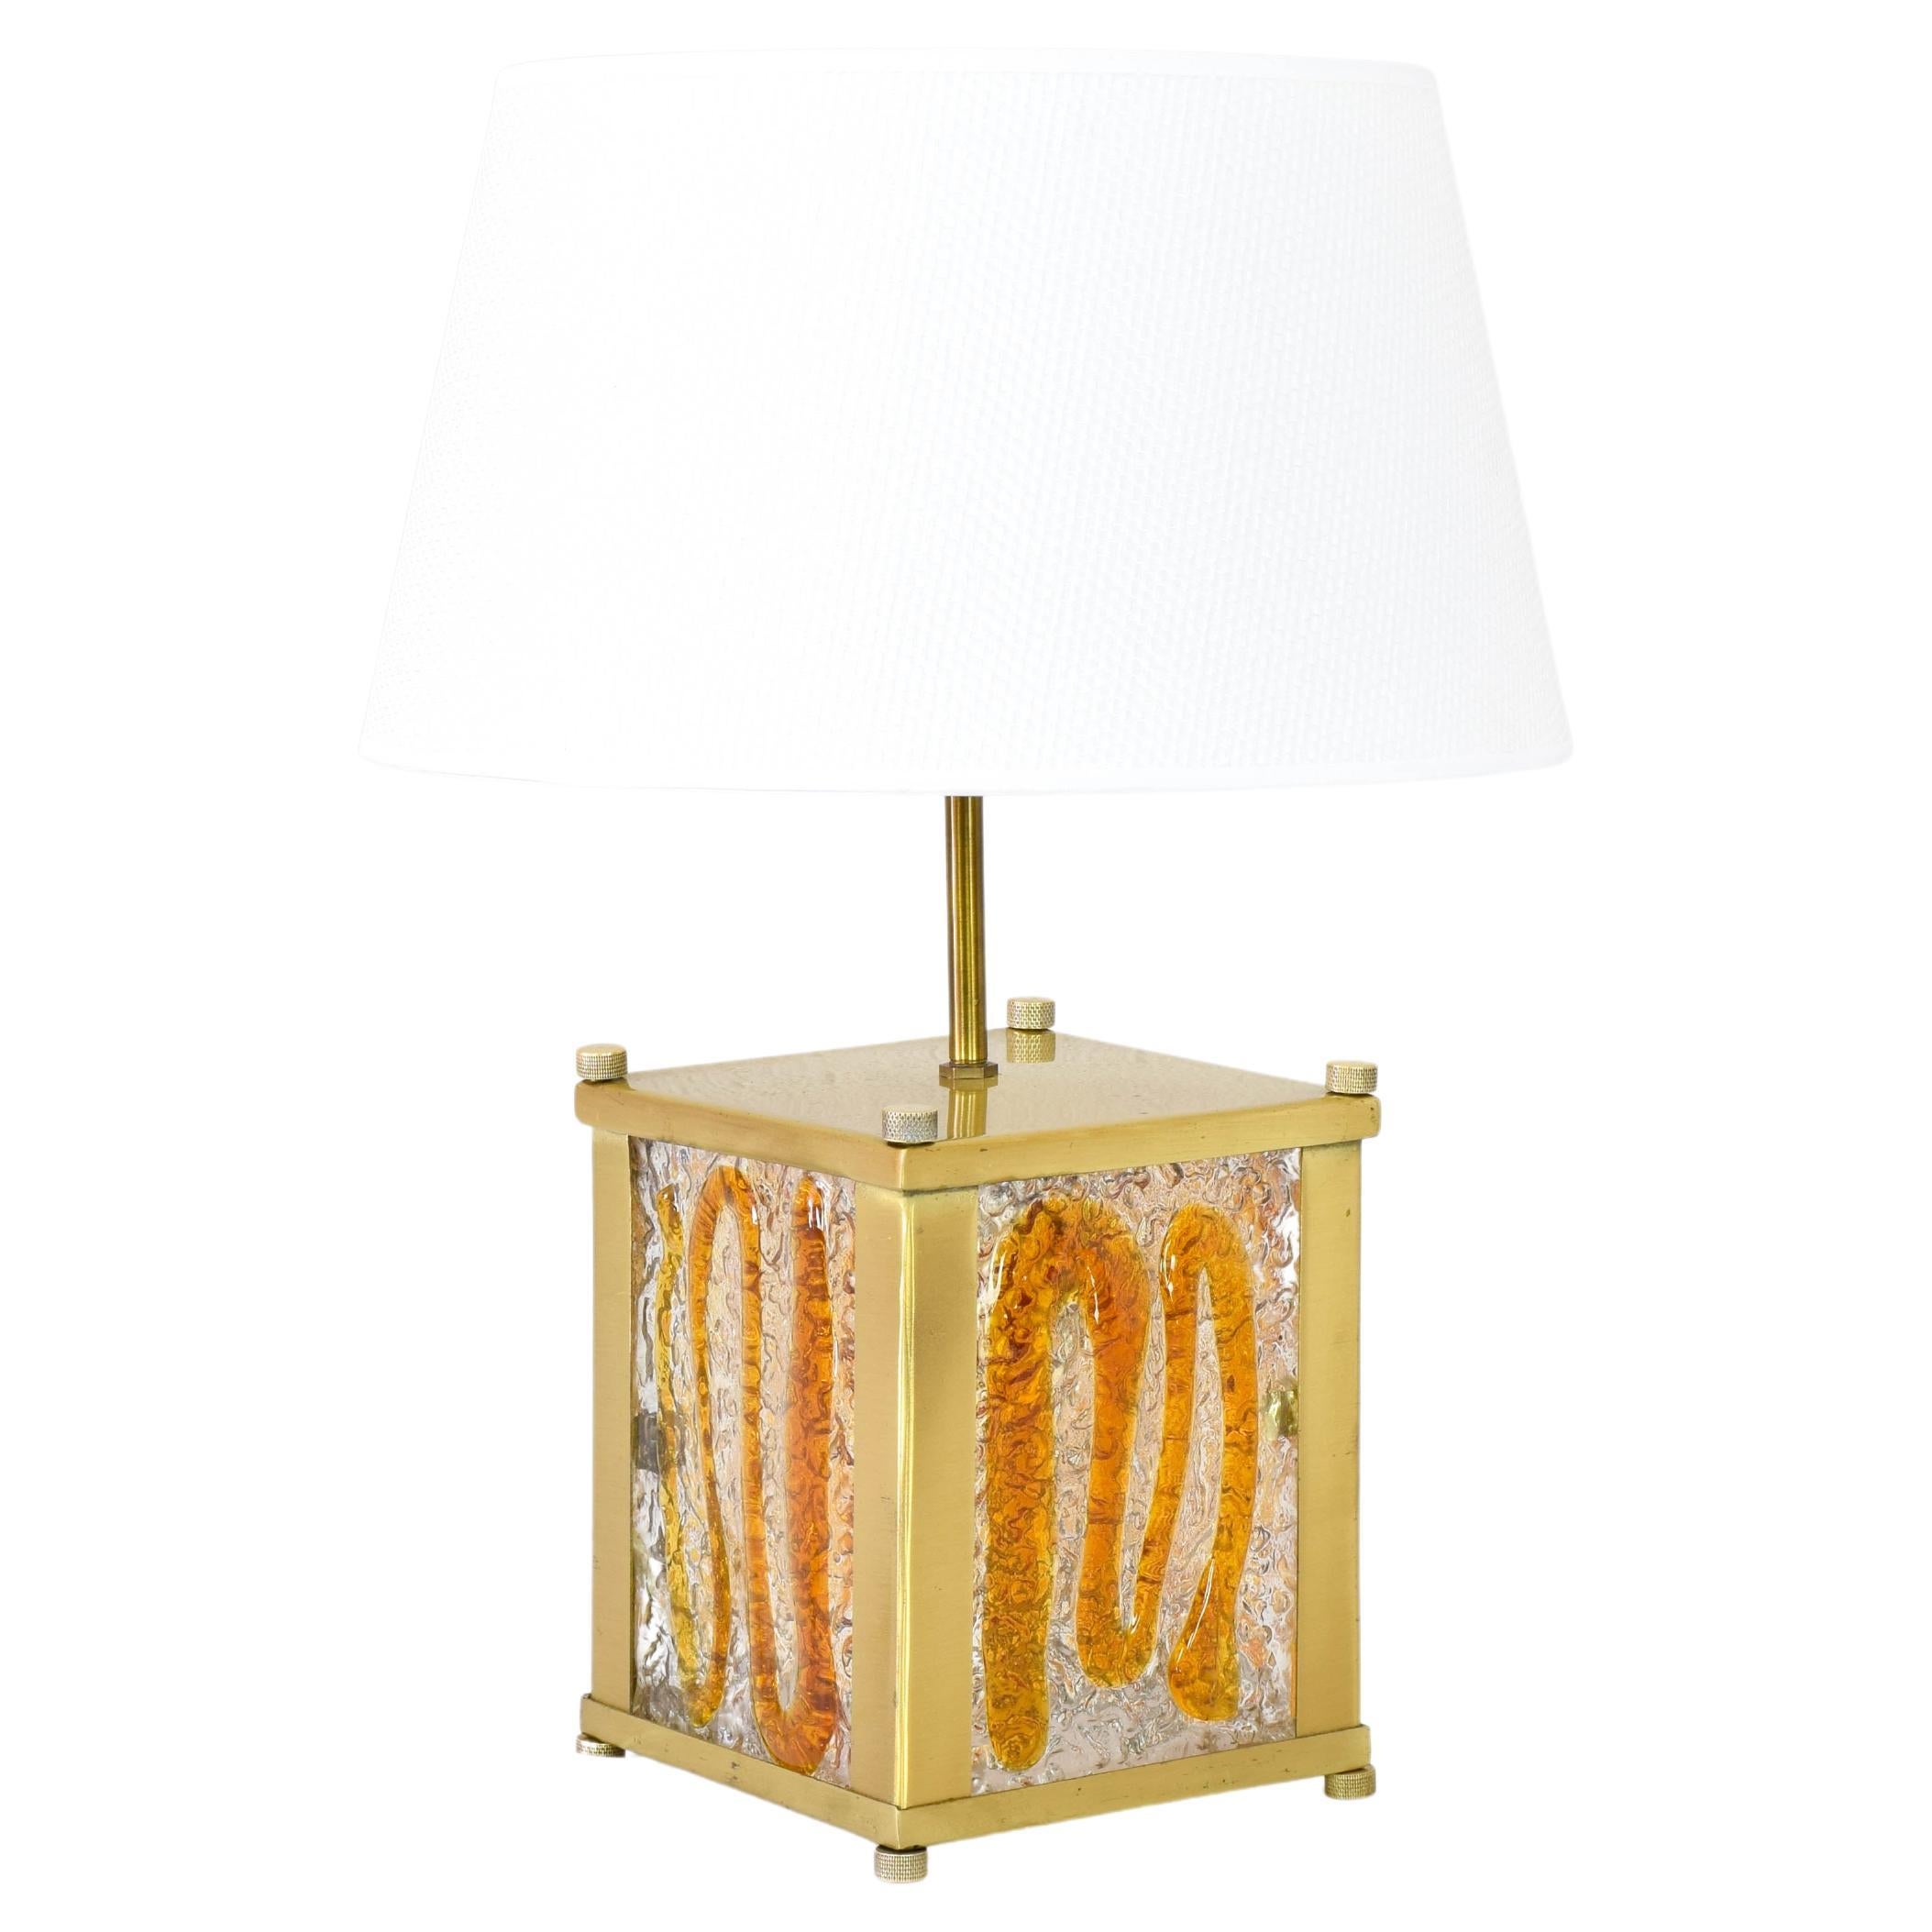 Antique Italian table lamp in the manner of Toni Zuccheri.
The lamp is made up of a cubic brass-plated metal body, amber-colored Murano glass plates and a lampshade.
The lamp has two lamp holders, one that illuminates the lampshade and the other